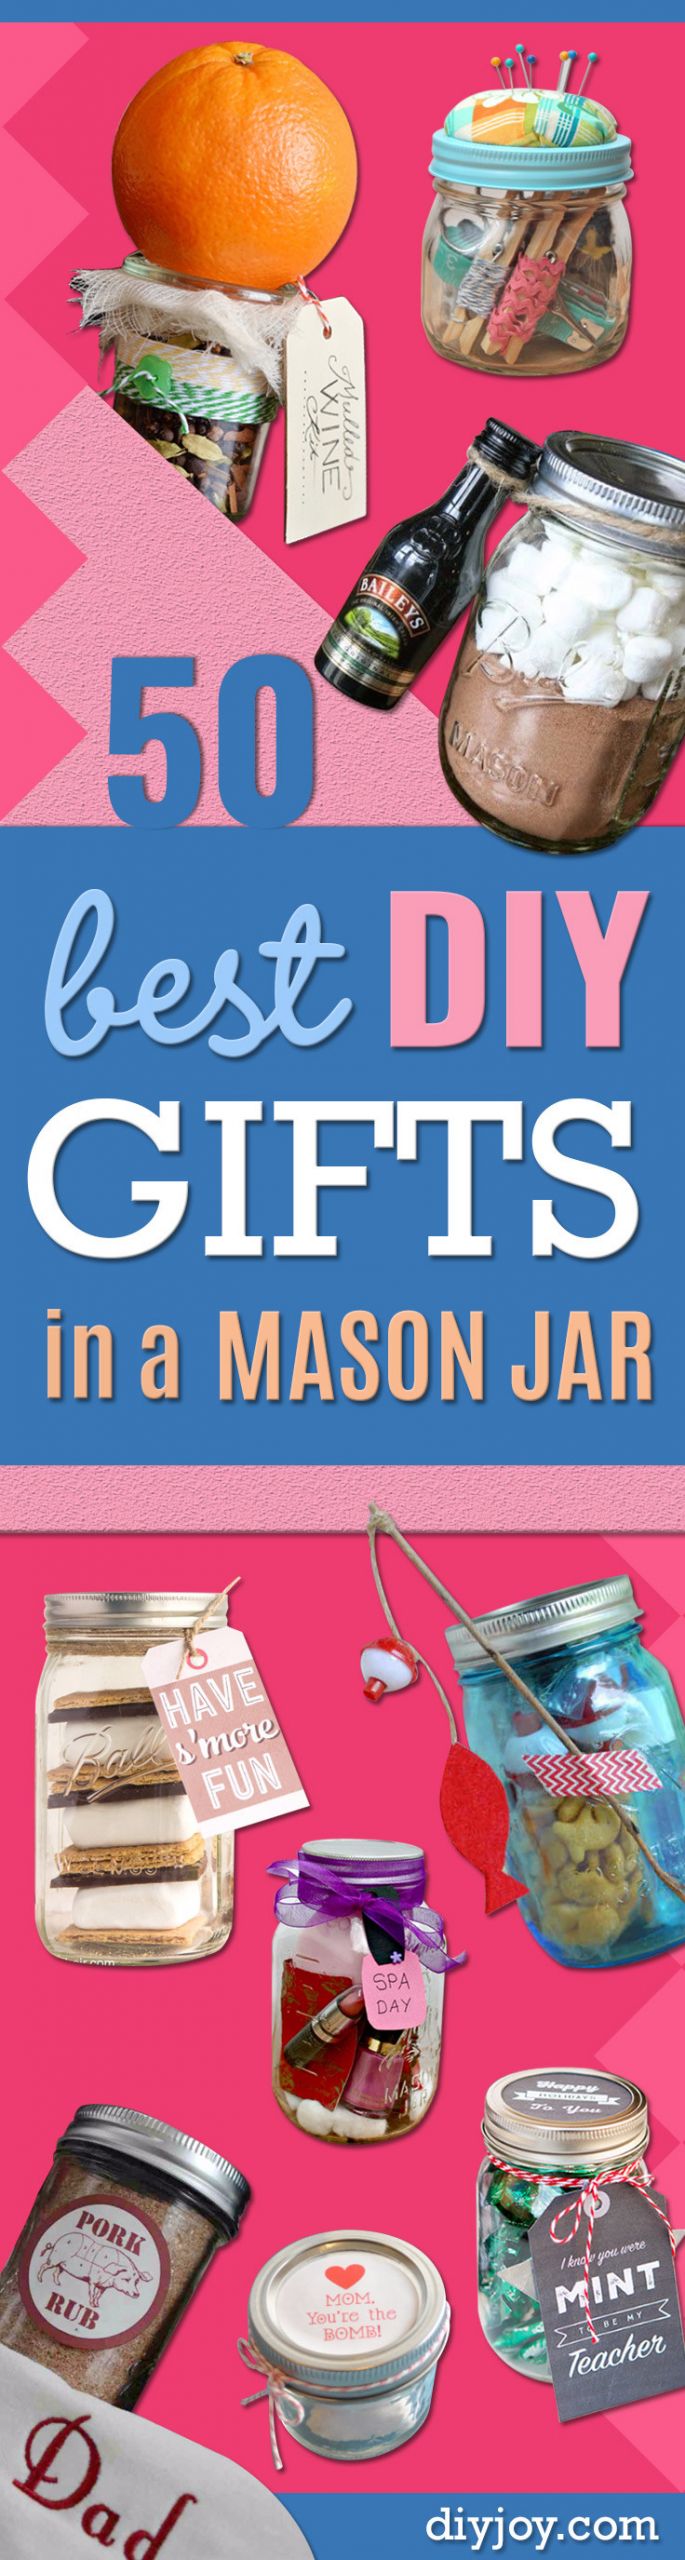 DIY Gifts For Best Friends
 50 Best DIY Gifts in Mason Jars